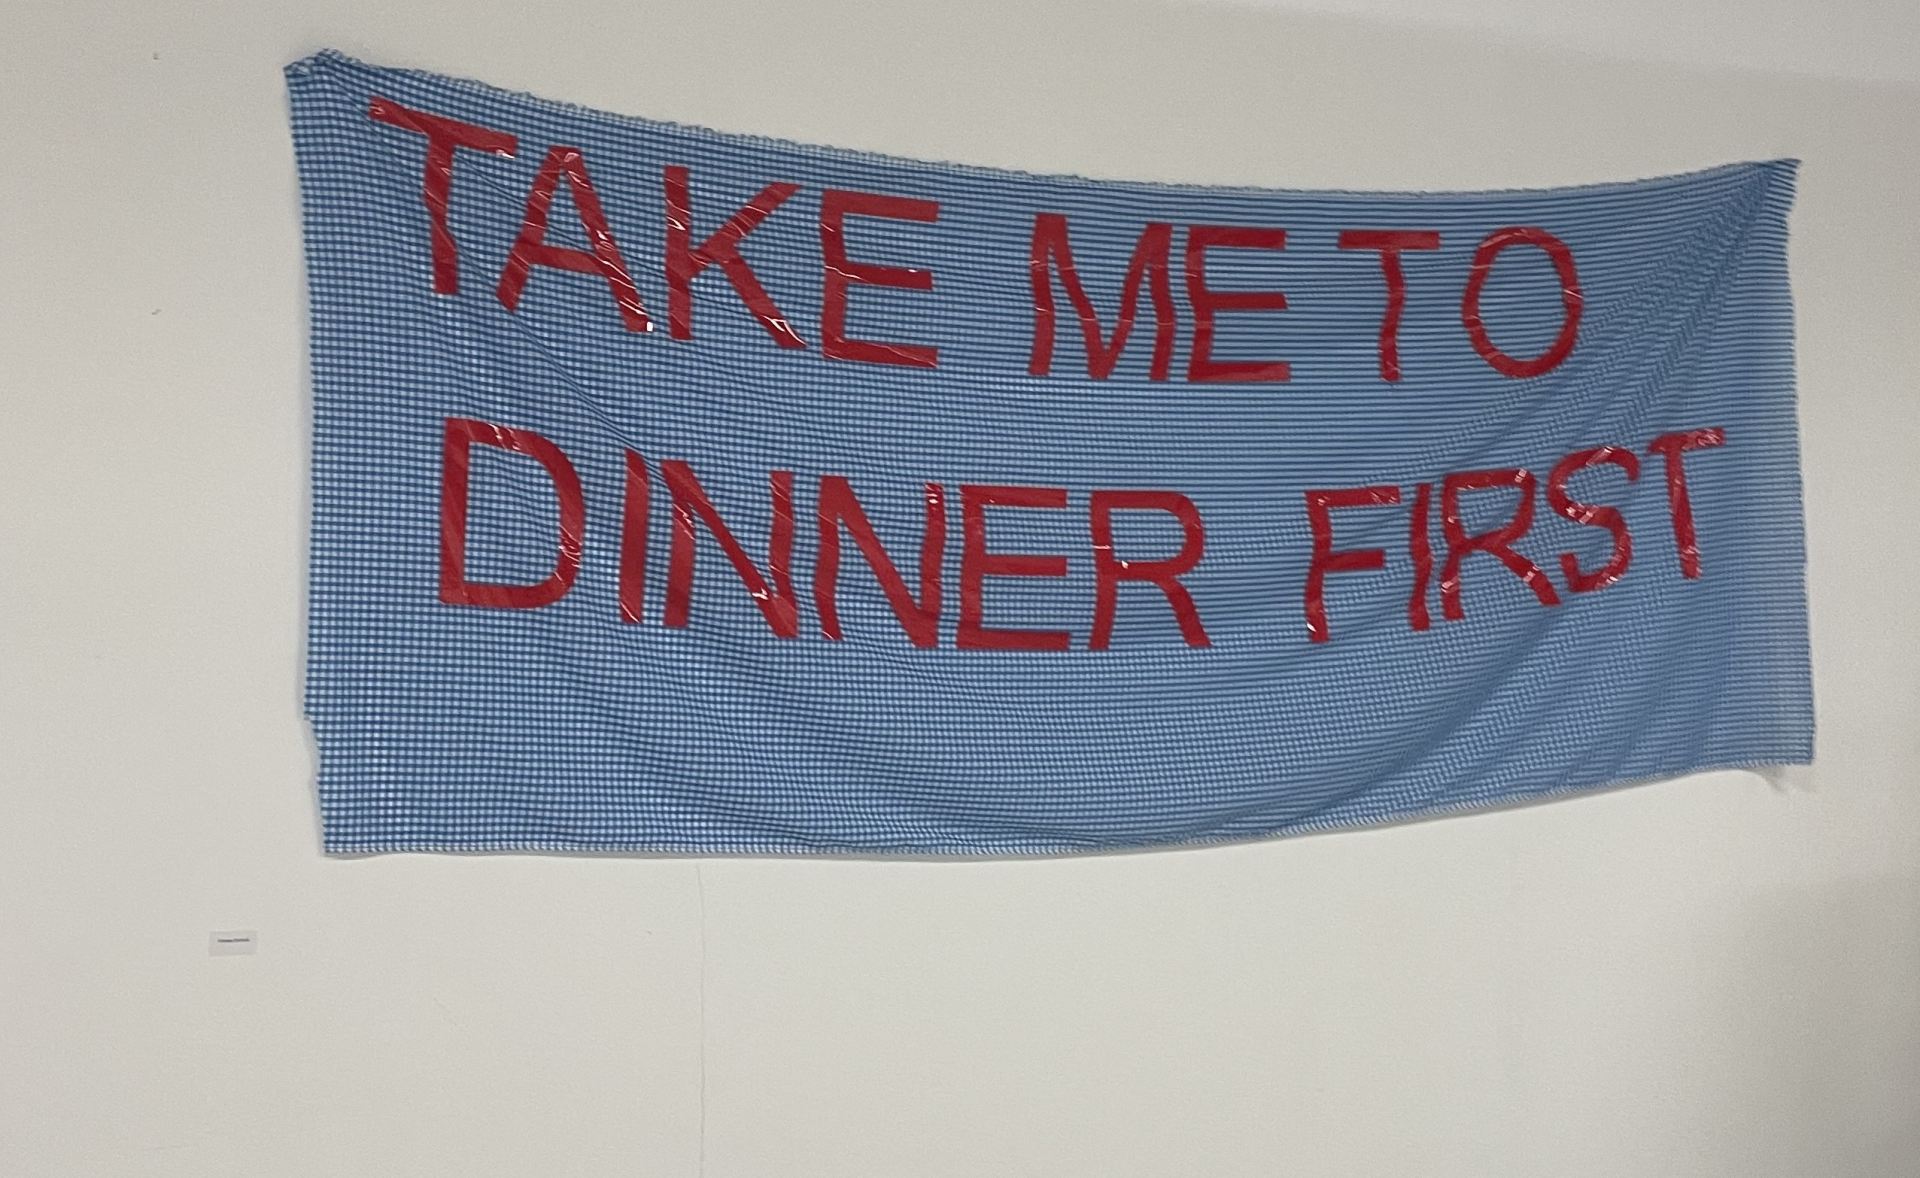 Blue gingham fabric hanging from a white wall, with the phrase “Take me to dinner first” written in red.
